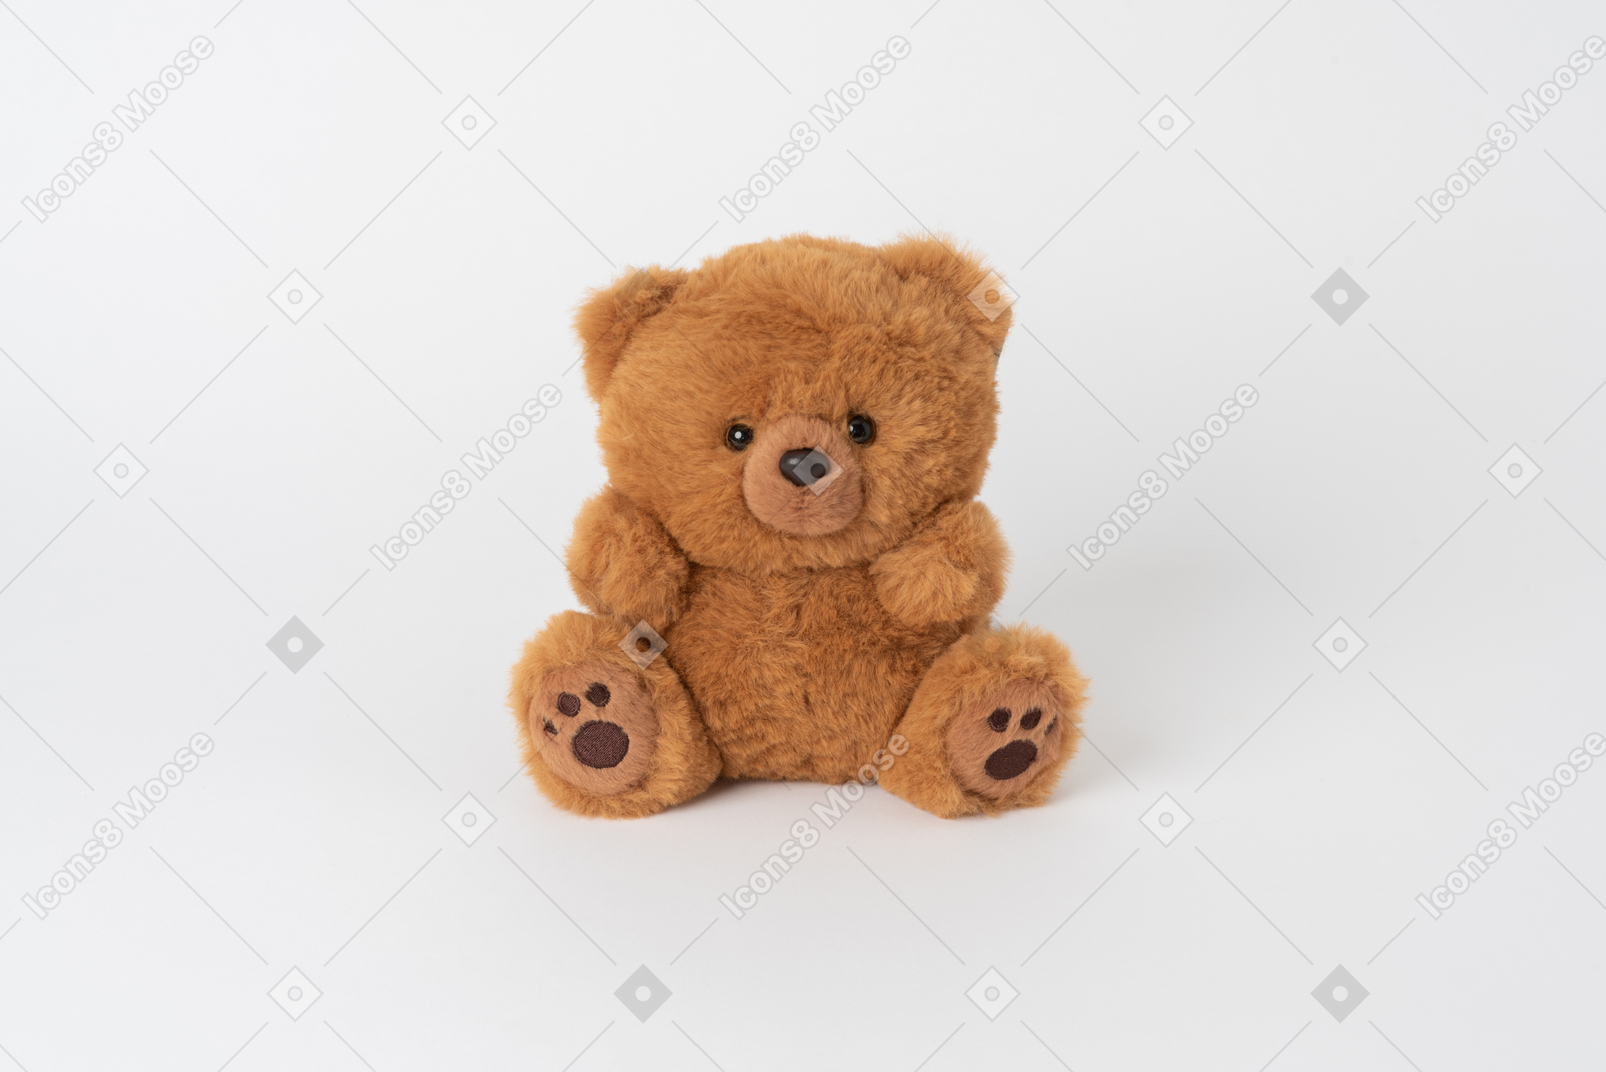 A little cute brown teddy bear sitting isolated against a plain white background